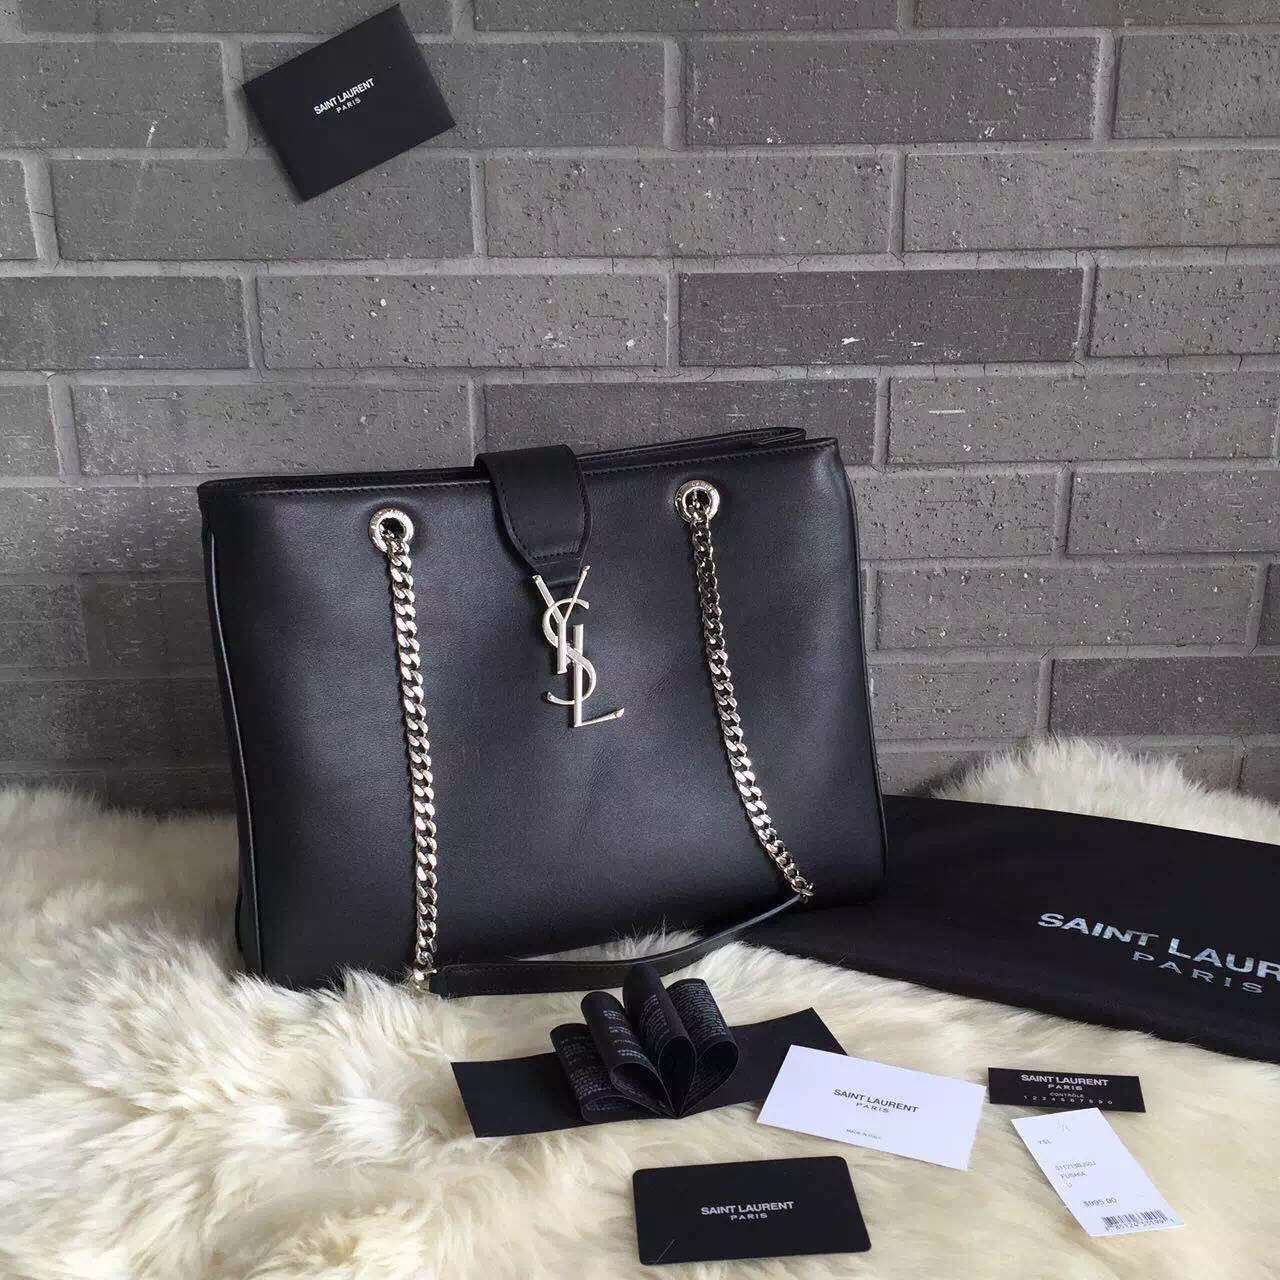 2015 New Saint Laurent Bag Cheap Sale-Saint Laurent Classic Monogram Shopping Bag in Black Smooth Calfskin Leather with Silver Chain